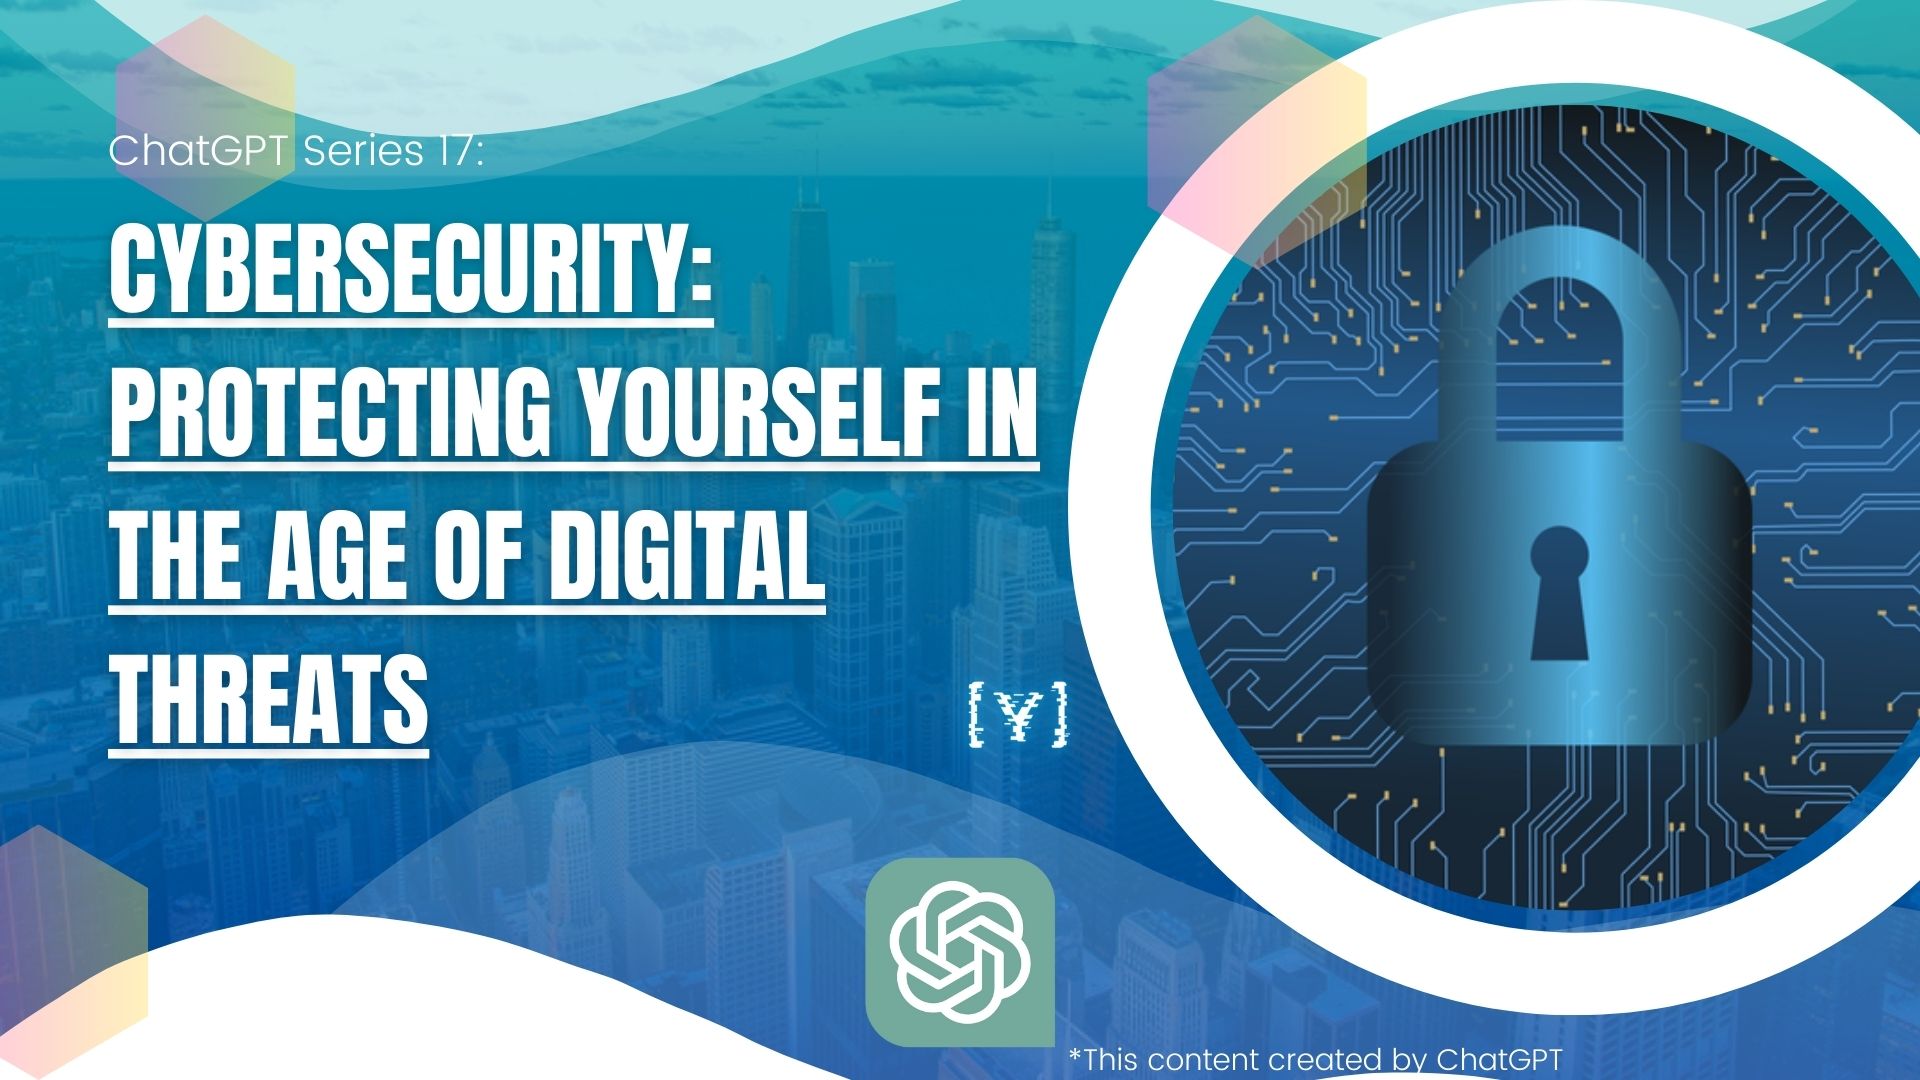 Cybersecurity: Protecting Yourself in the Age of Digital Threats